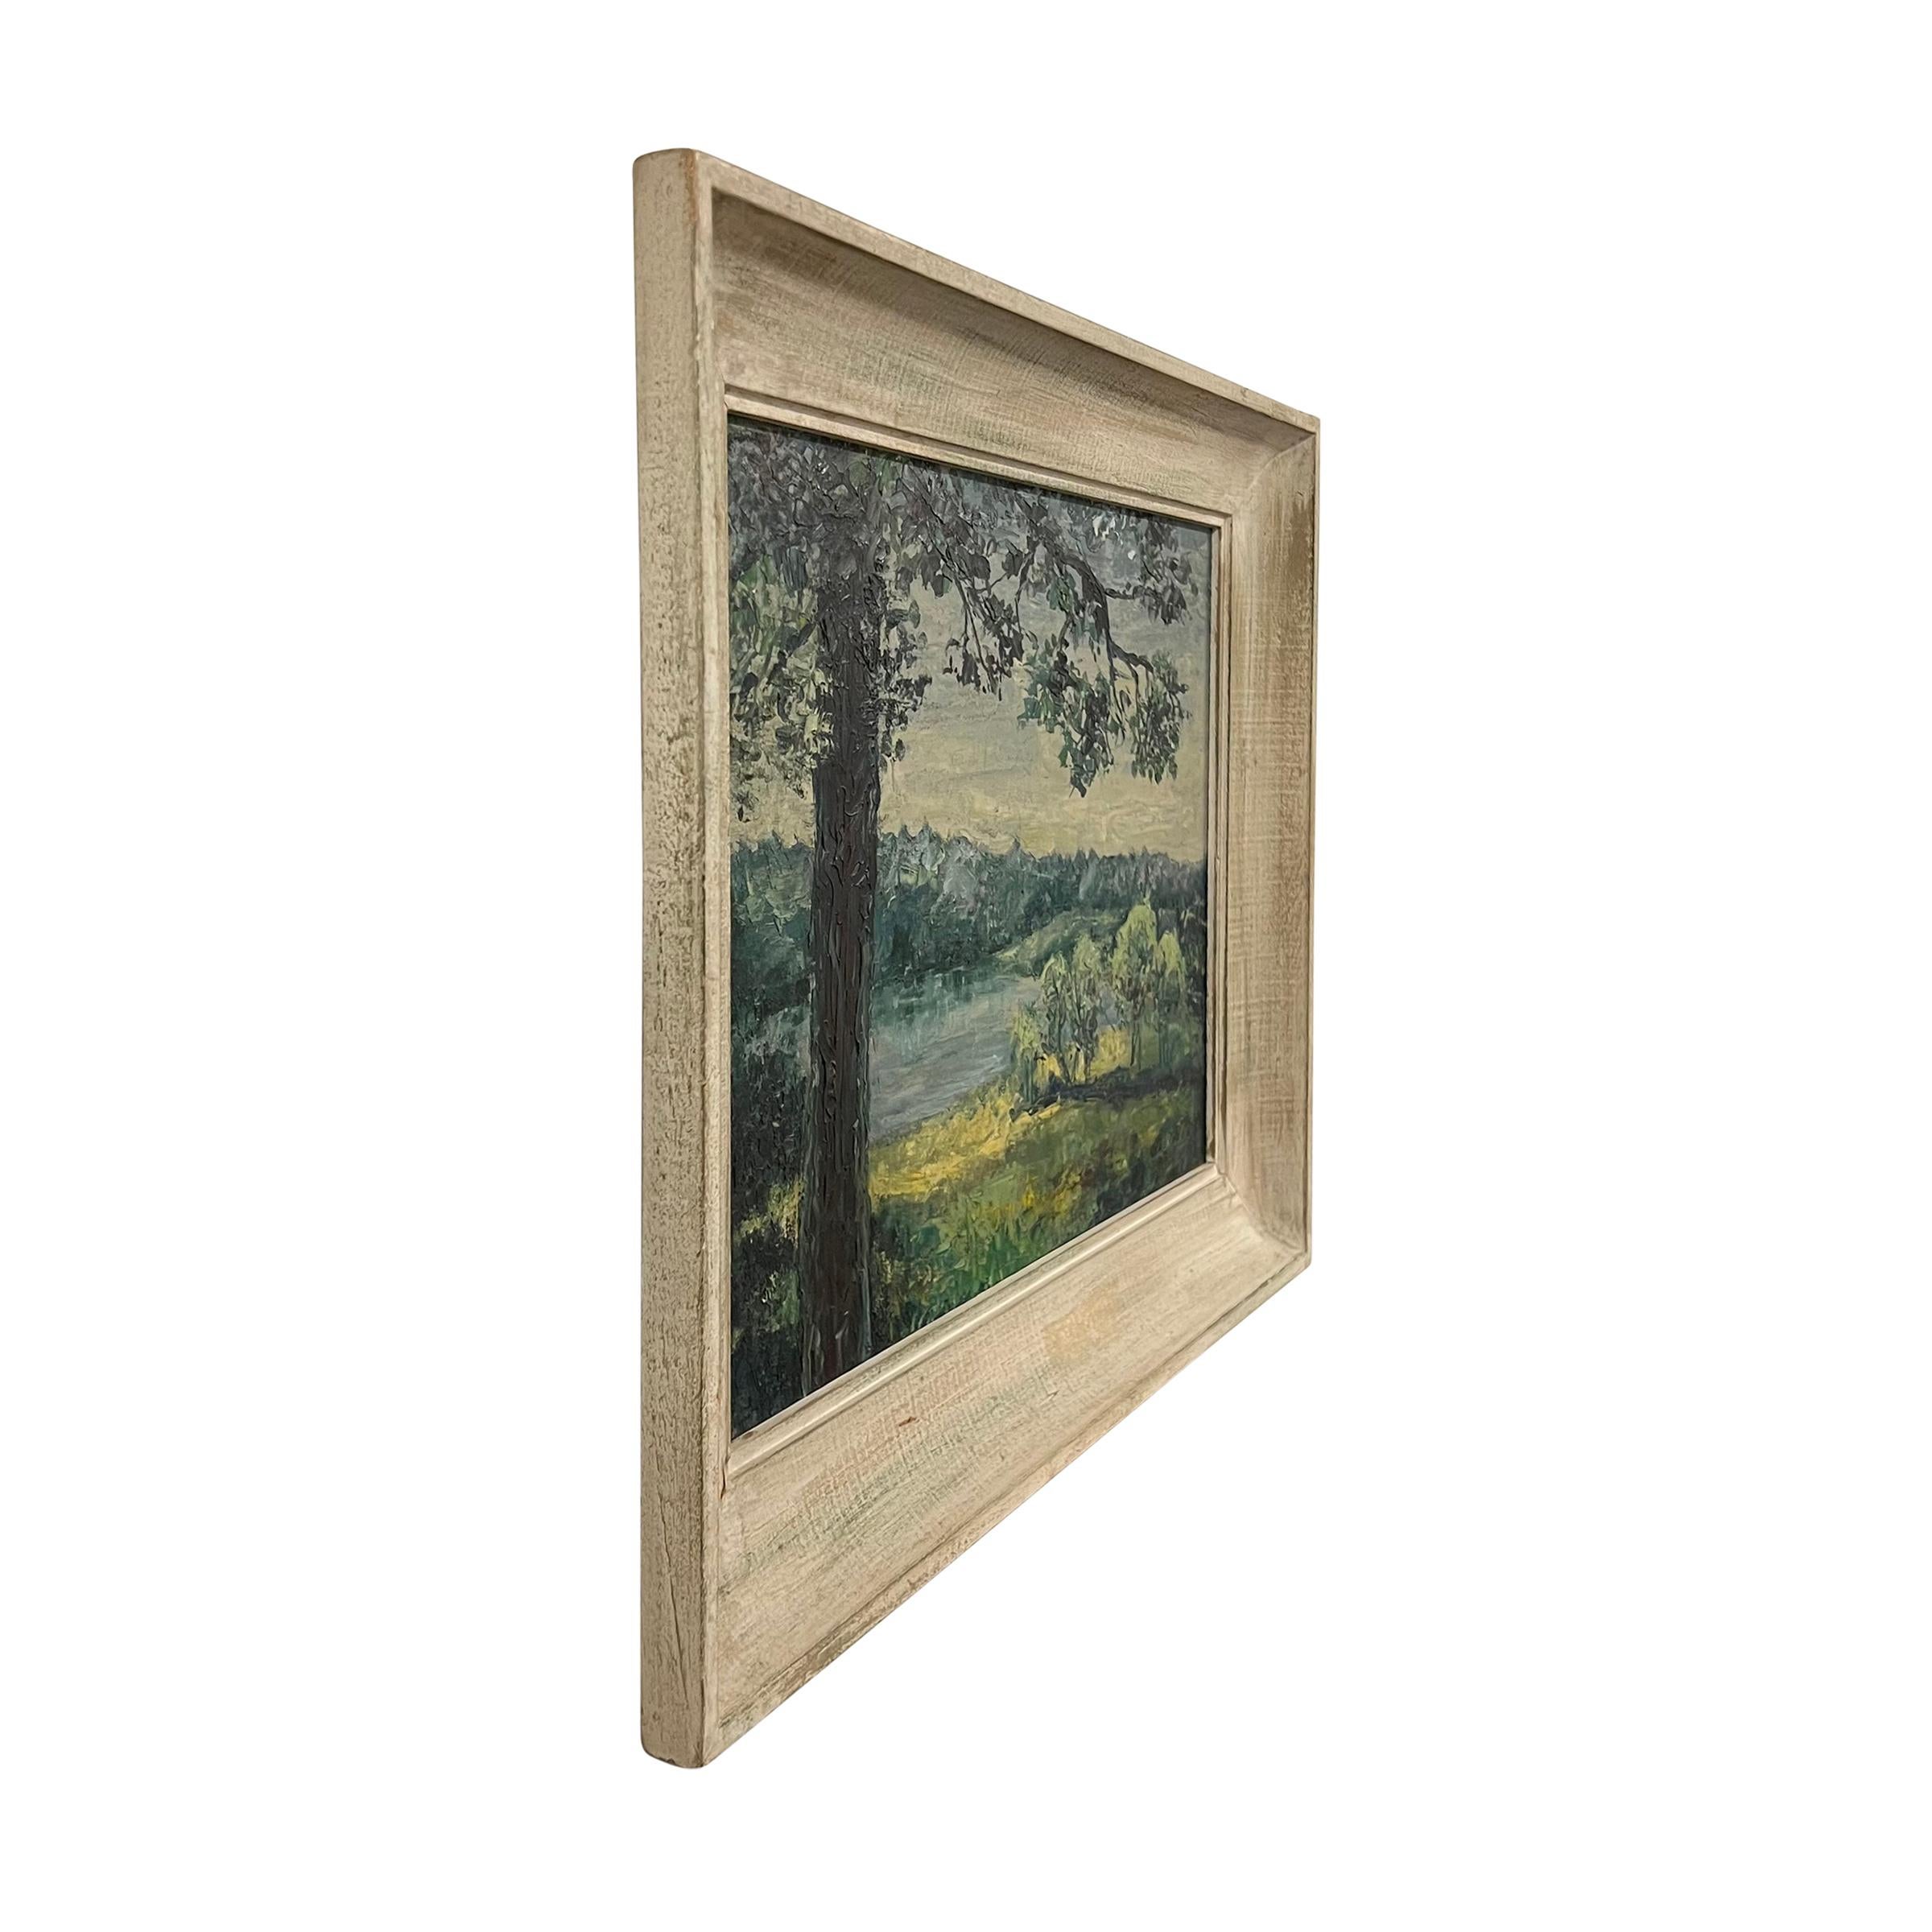 Hand-Painted 20th Century American Plein Air Landscape Painting